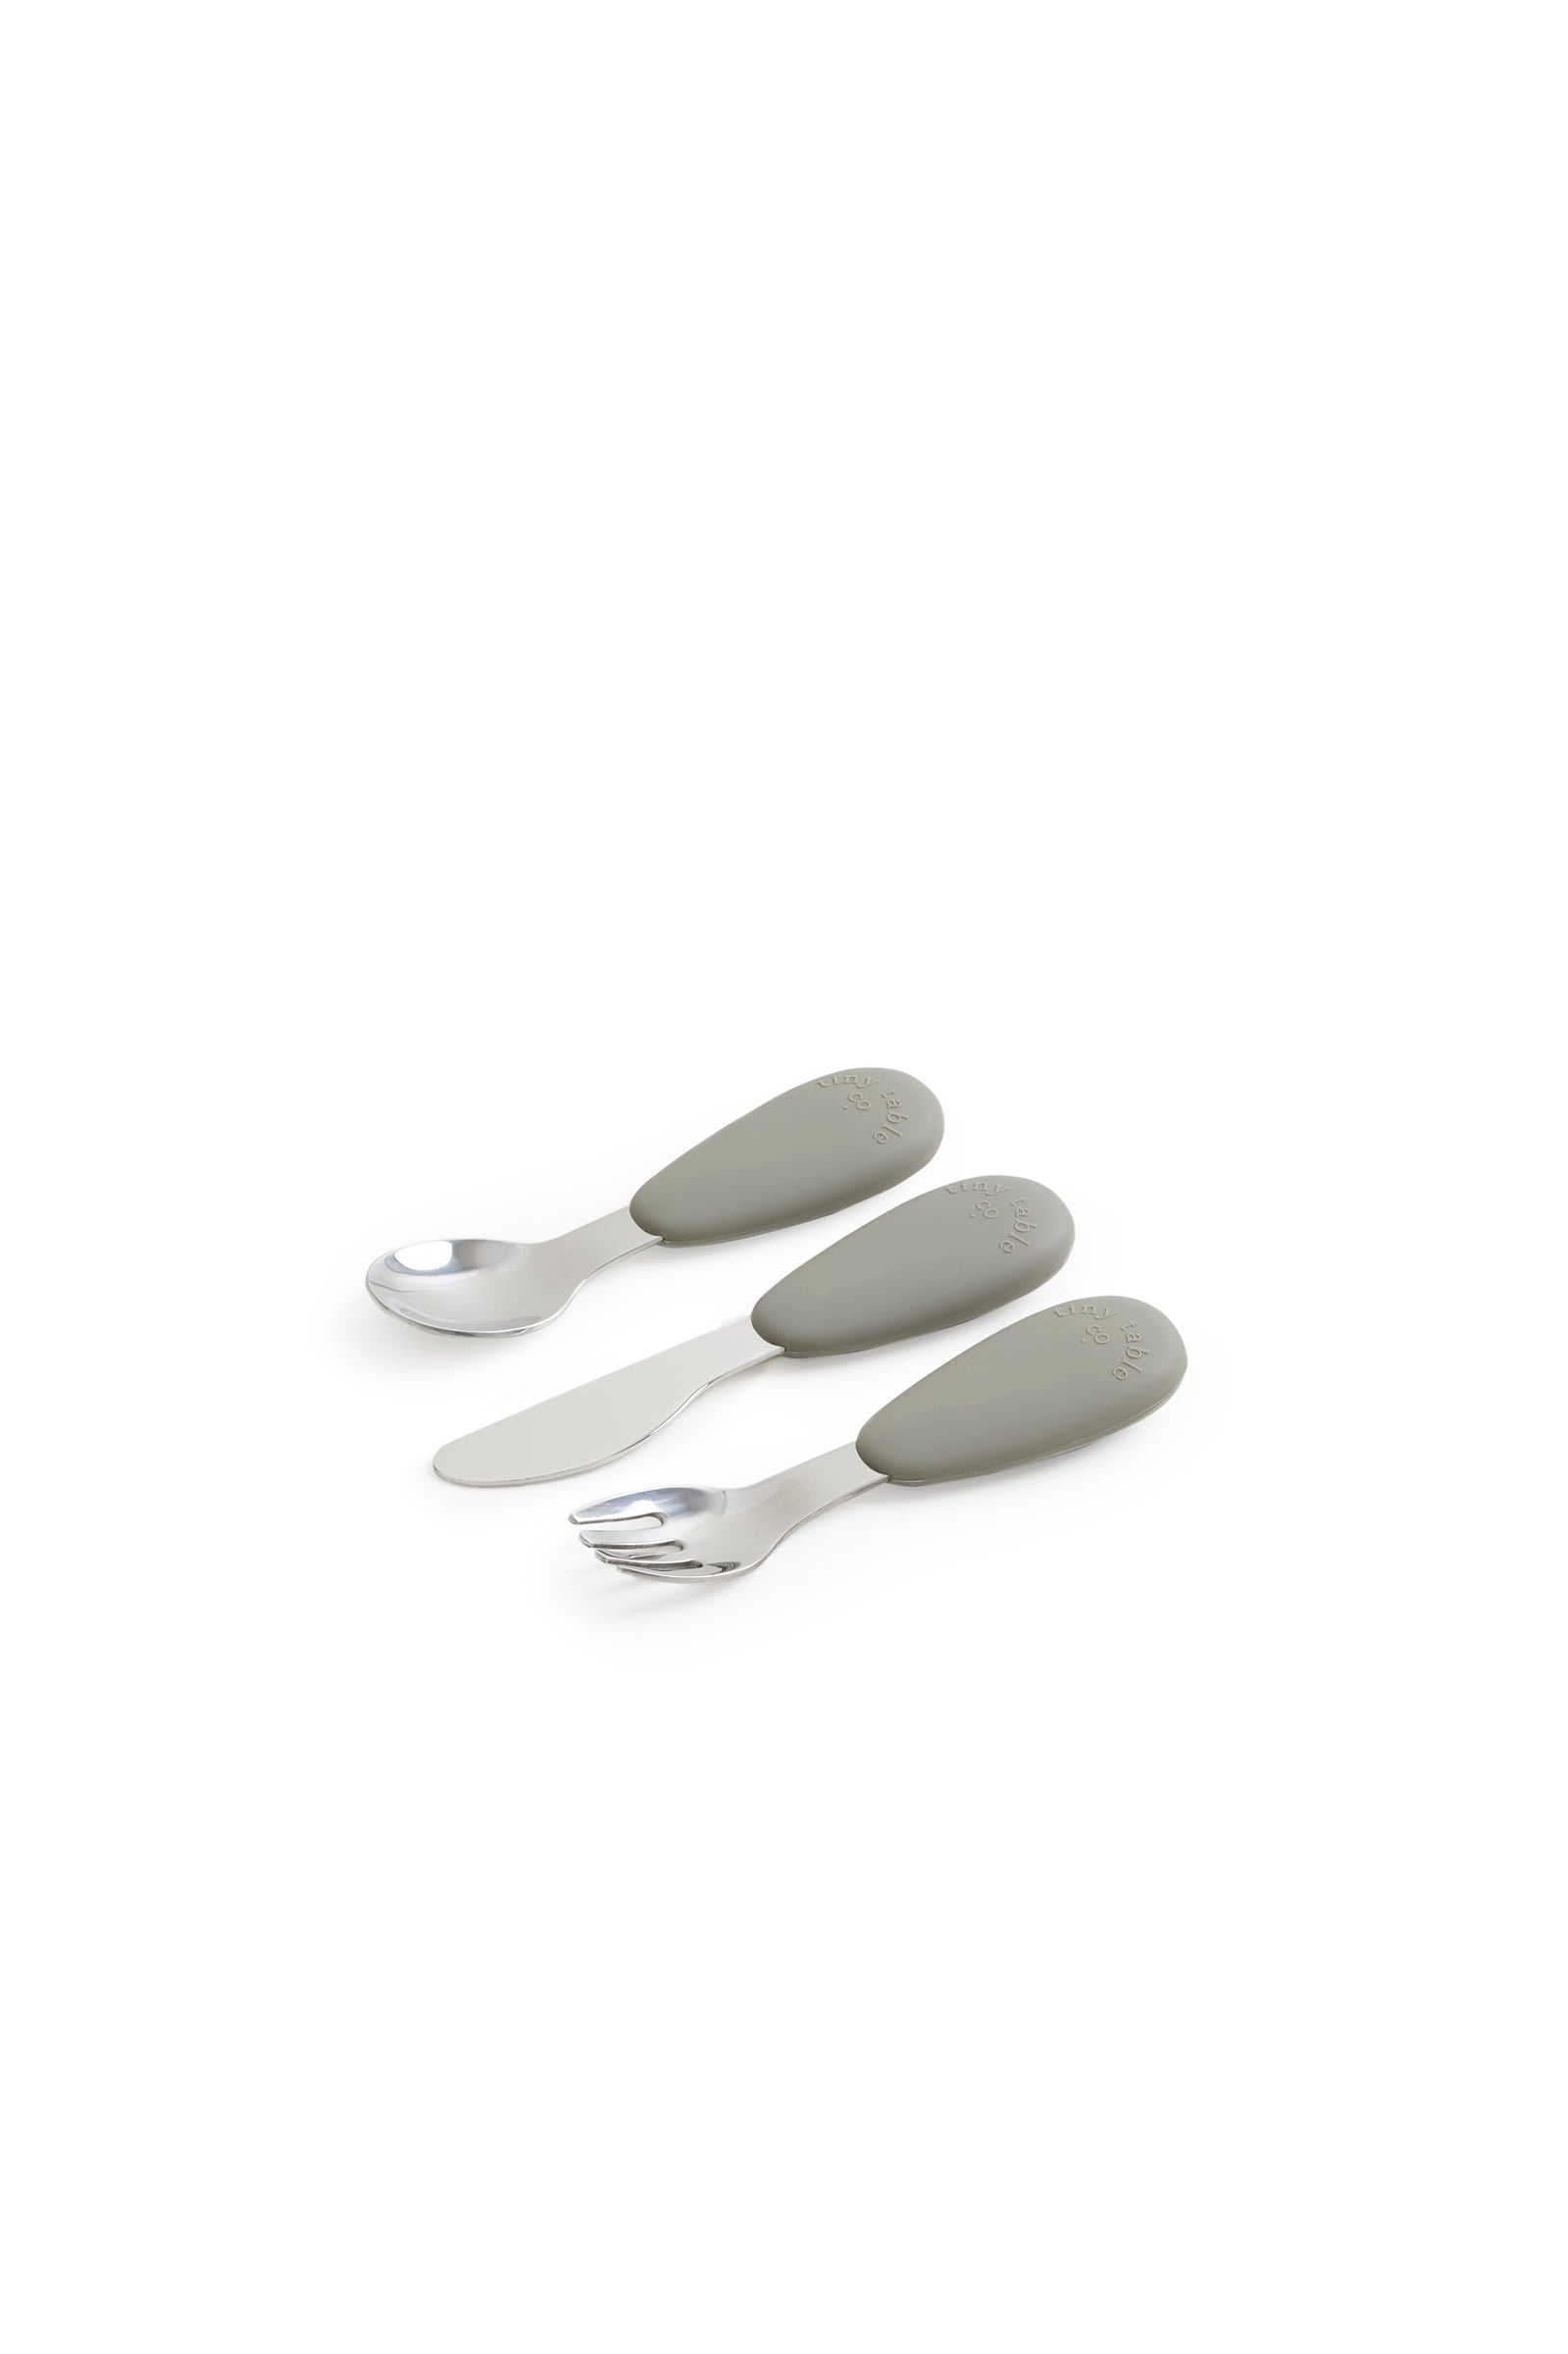 tiny table co. first cutlery set